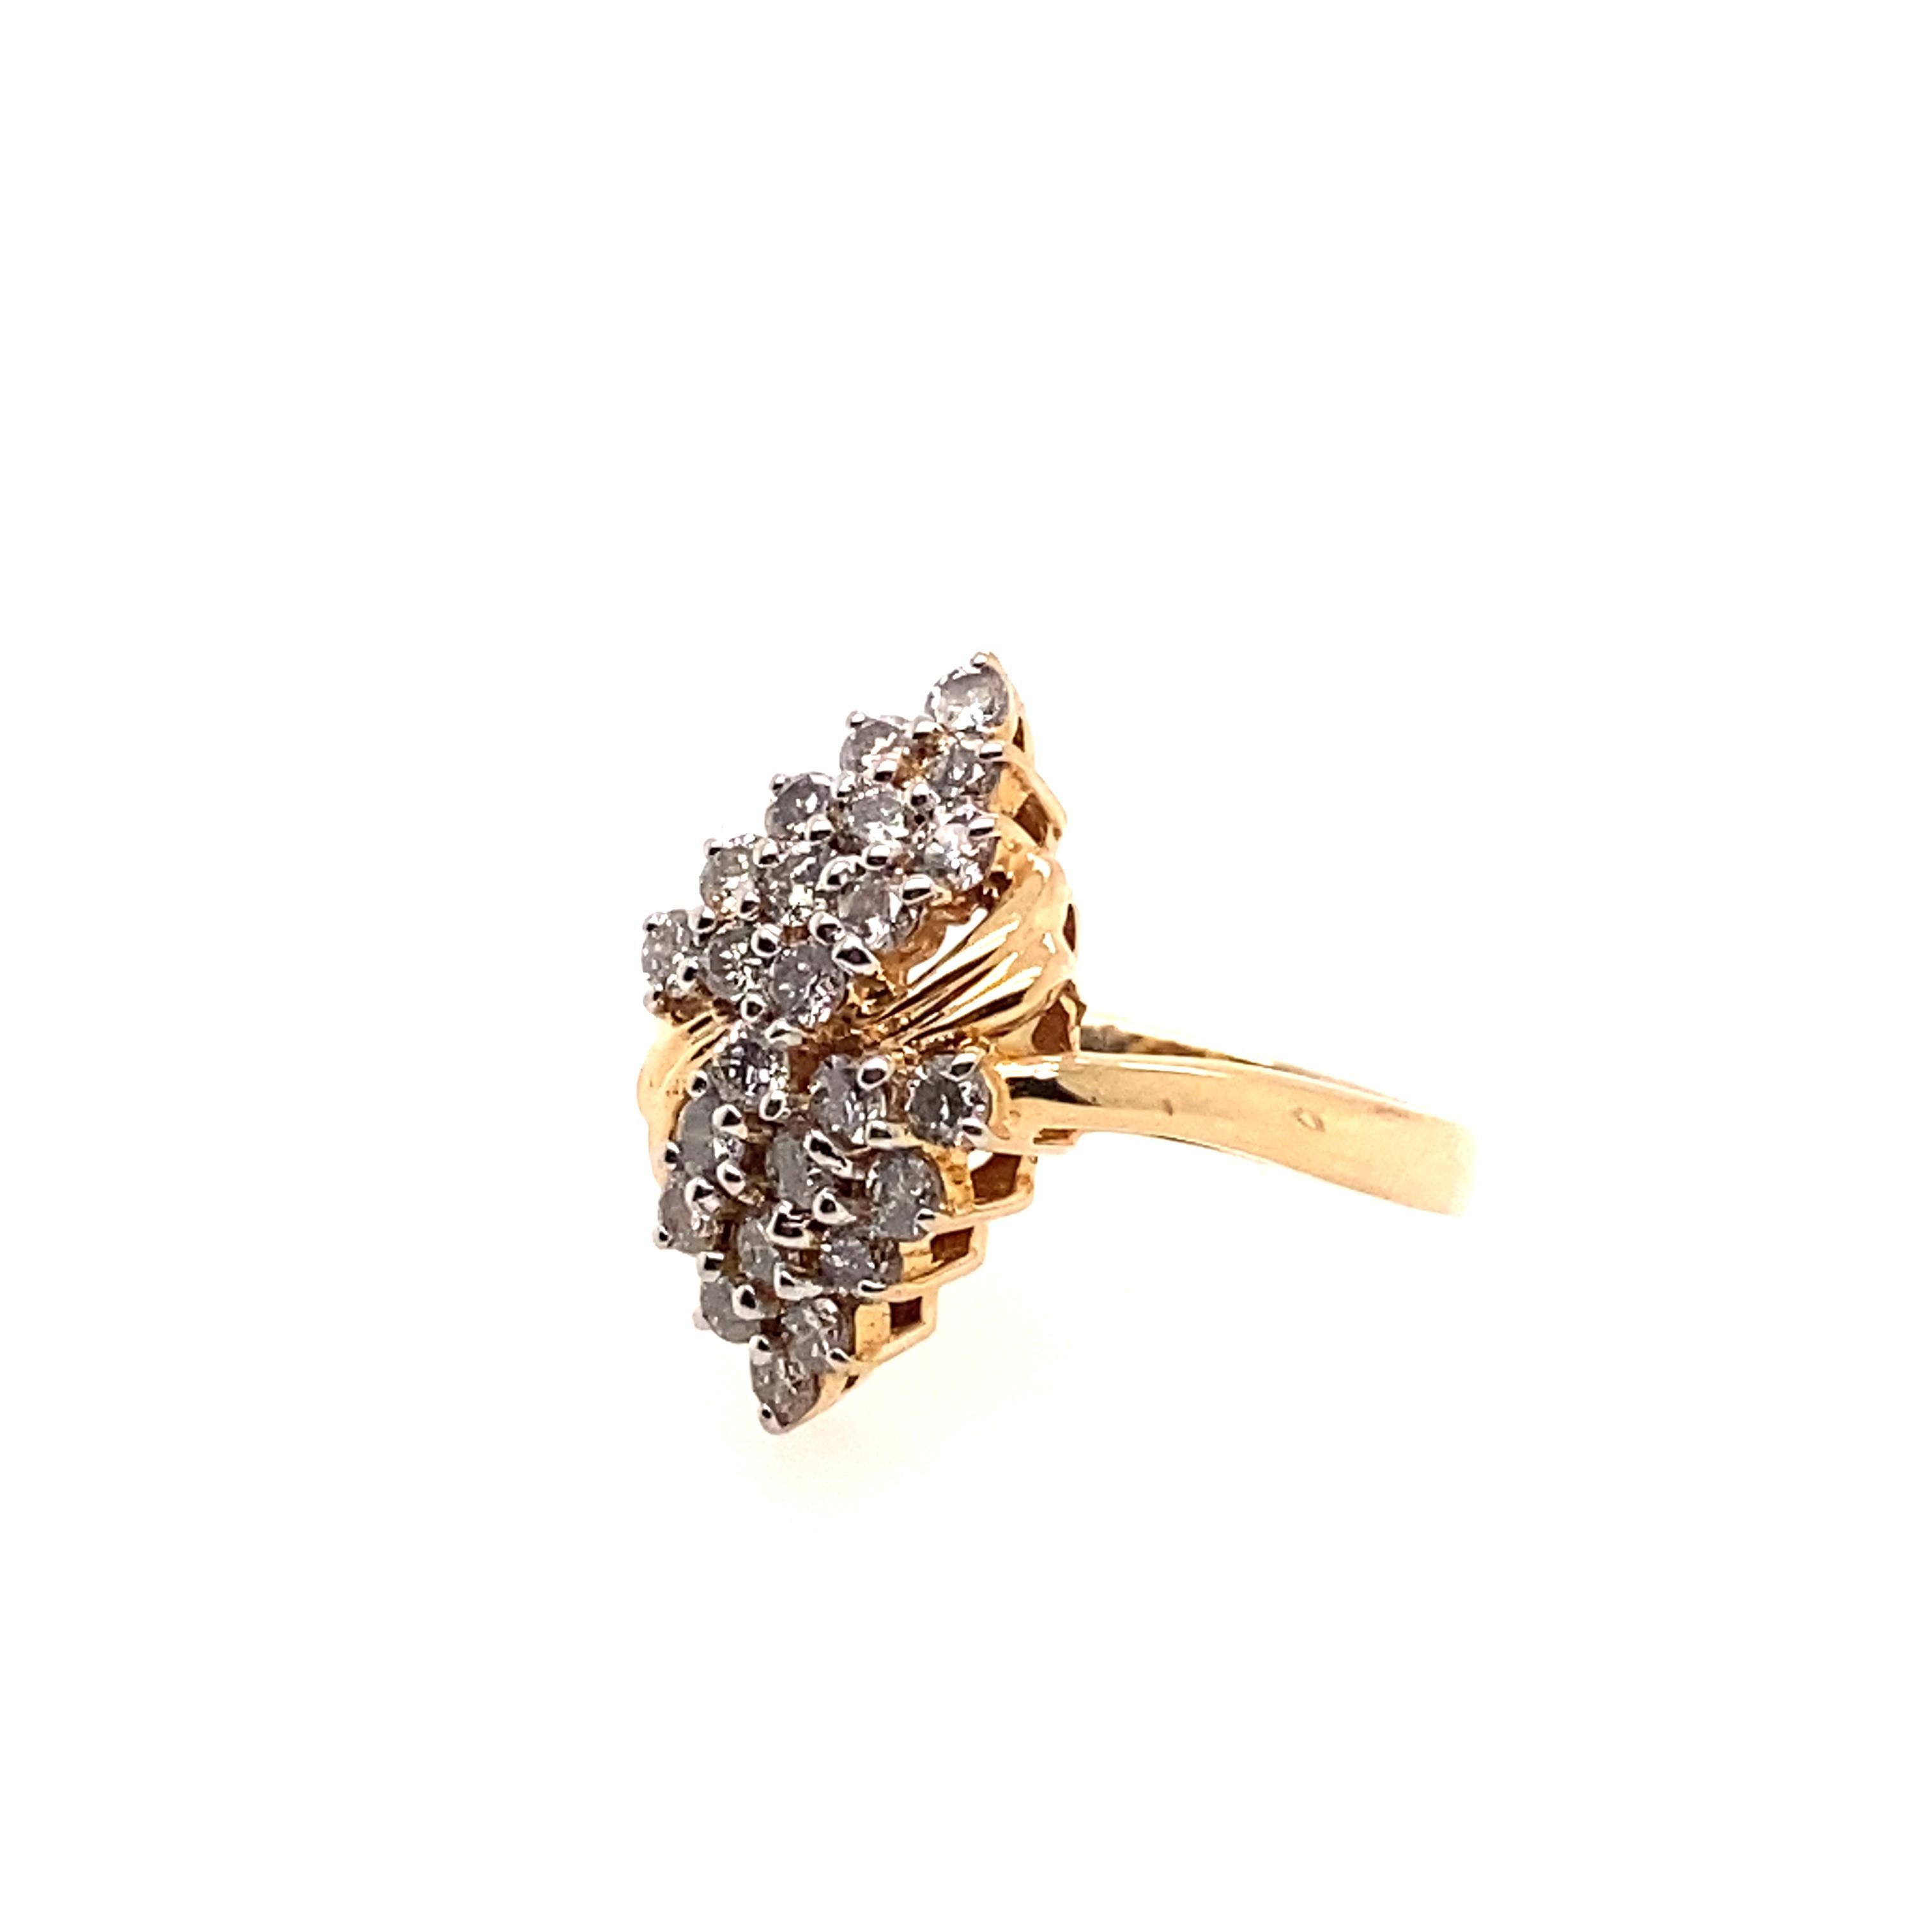 The twenty-four brilliant round diamonds set in the 14K yellow gold ring featured by a cluster design. This ring features a very fashionable look and can be worn daily-wear. 

Diamonds Weight: 1.00 carat
Diamonds Shape : Brilliant Round
Diamonds